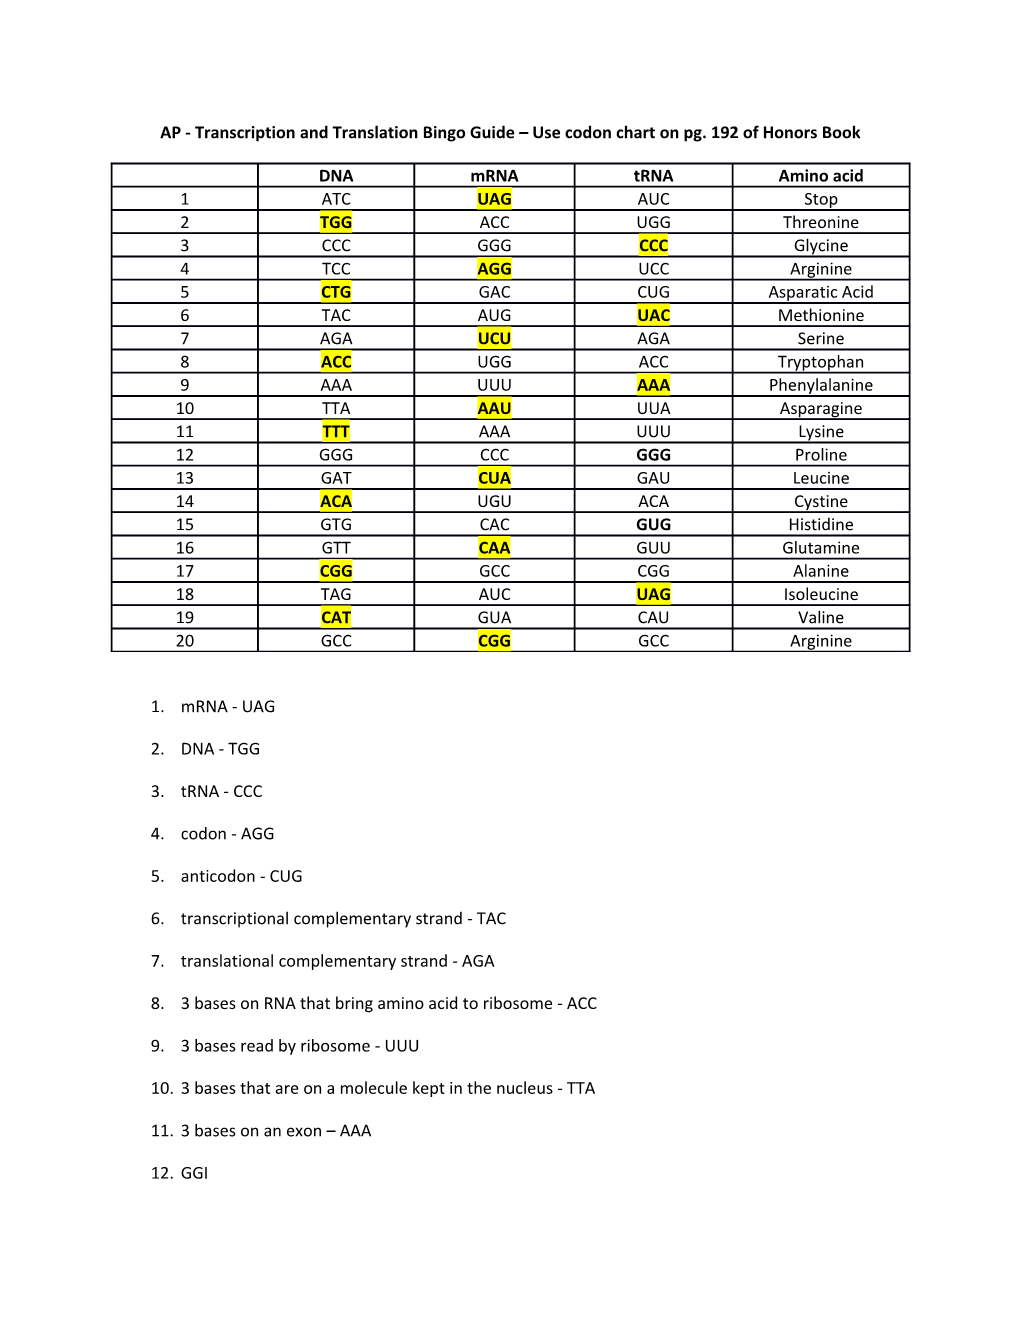 AP - Transcription and Translation Bingo Guide Use Codon Chart on Pg. 192 of Honors Book